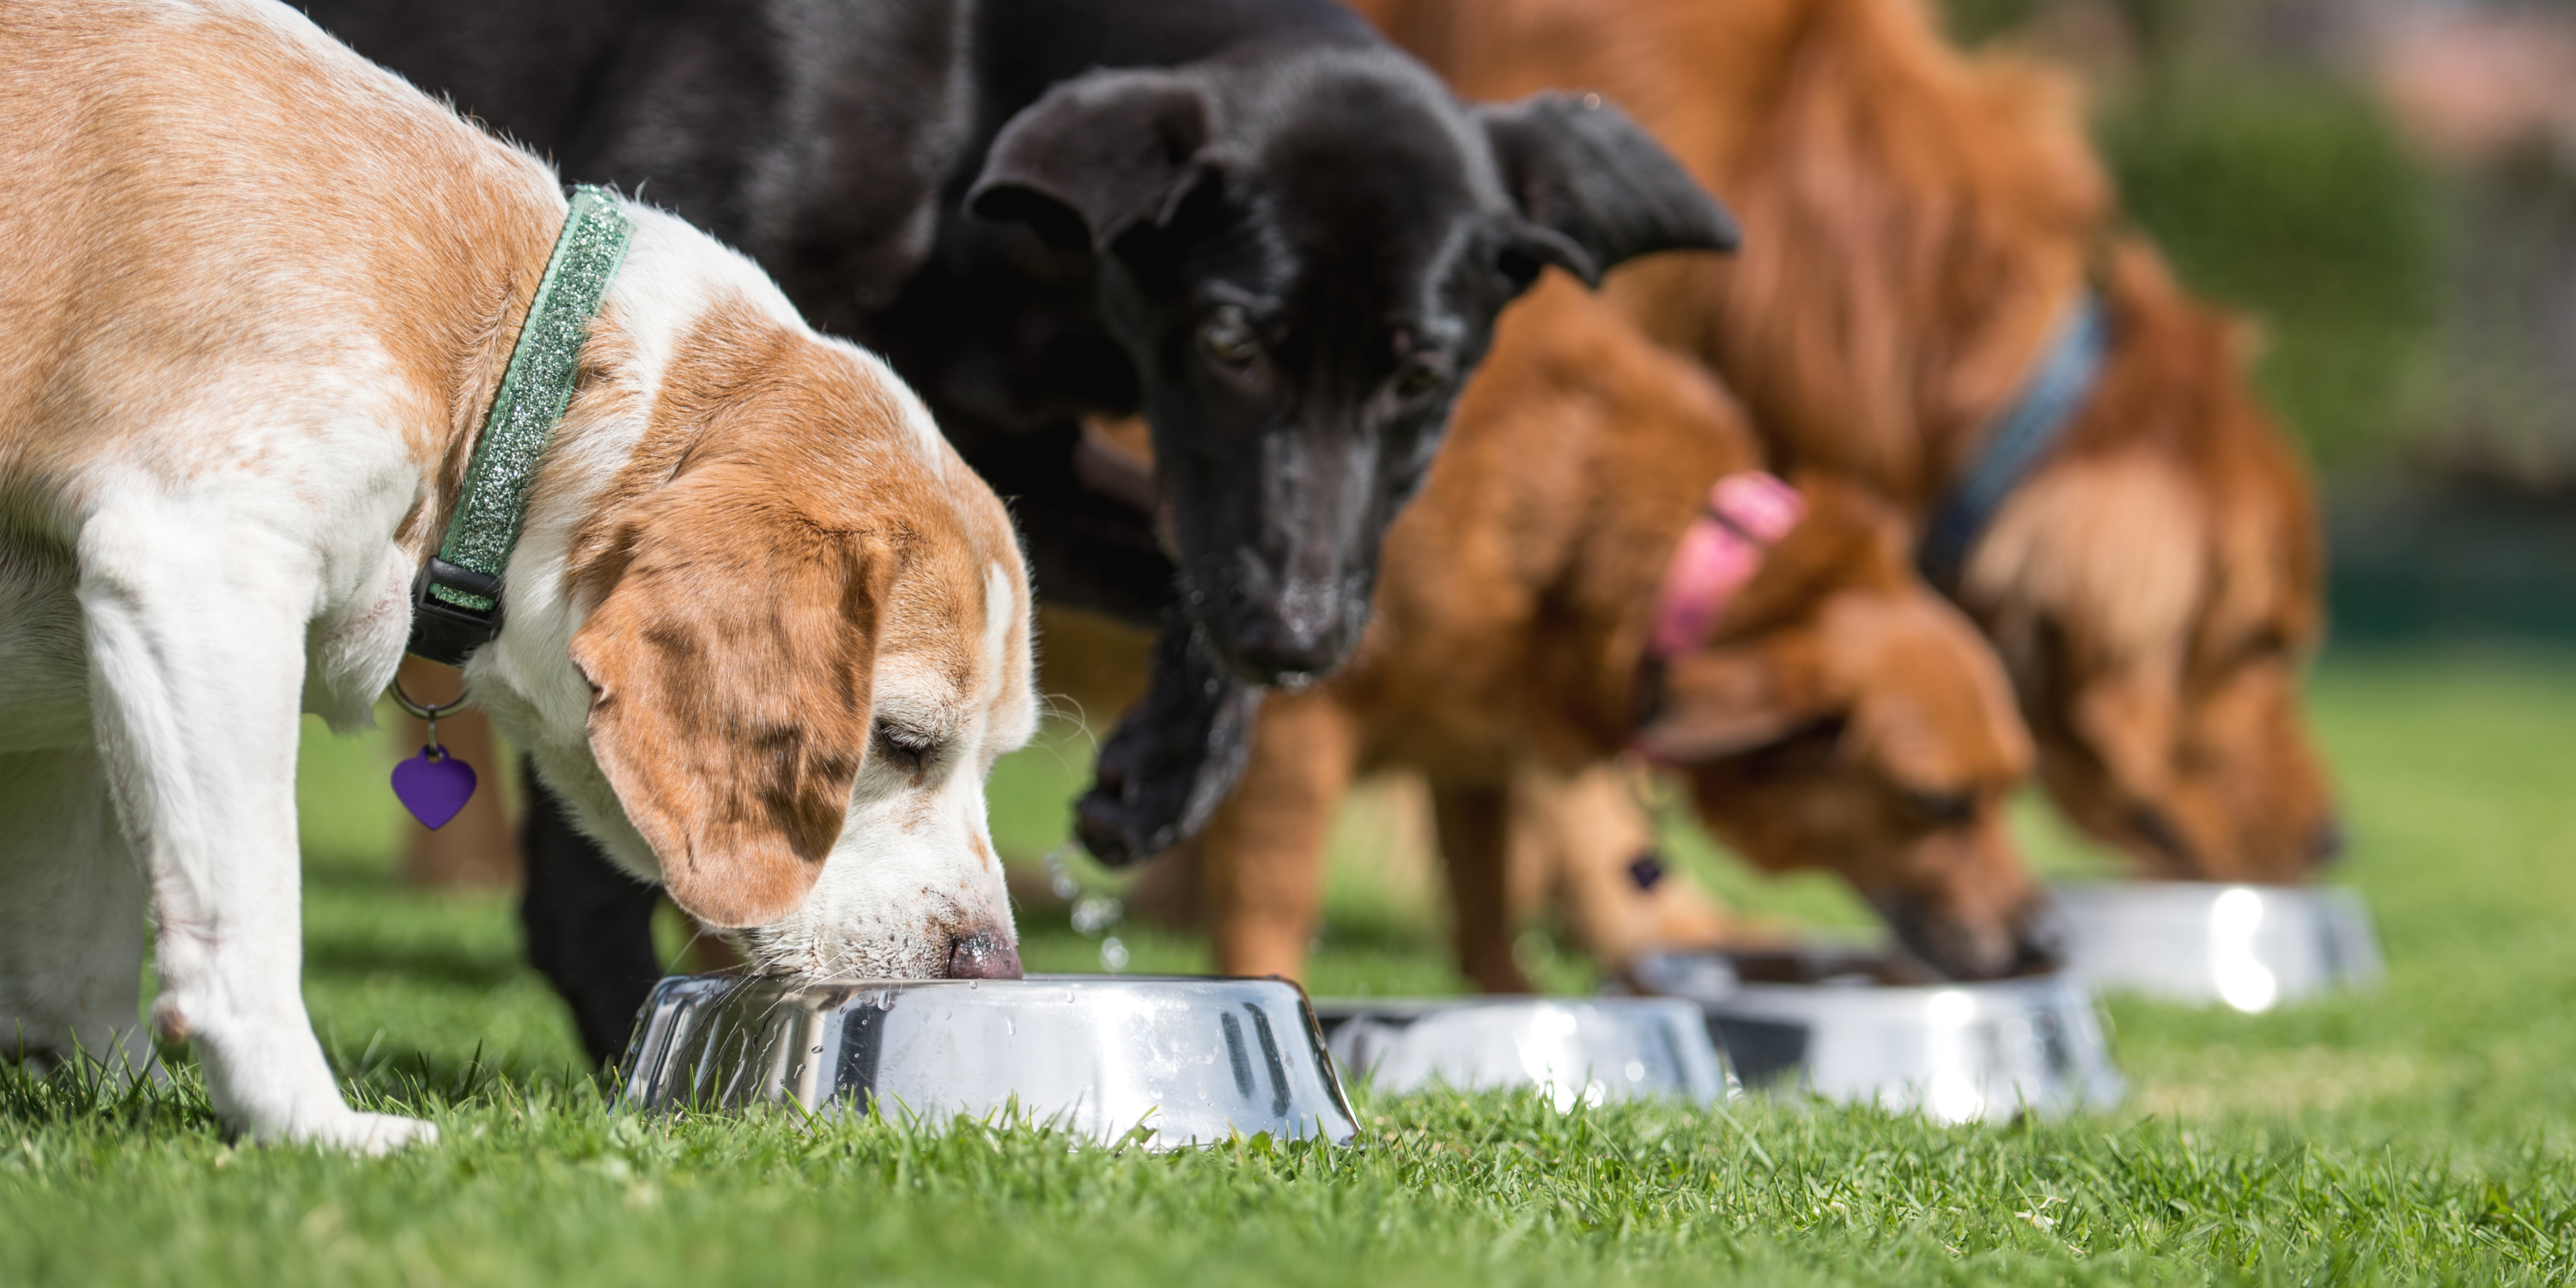 Top 5 Ingredients to look out for when selecting a dog food